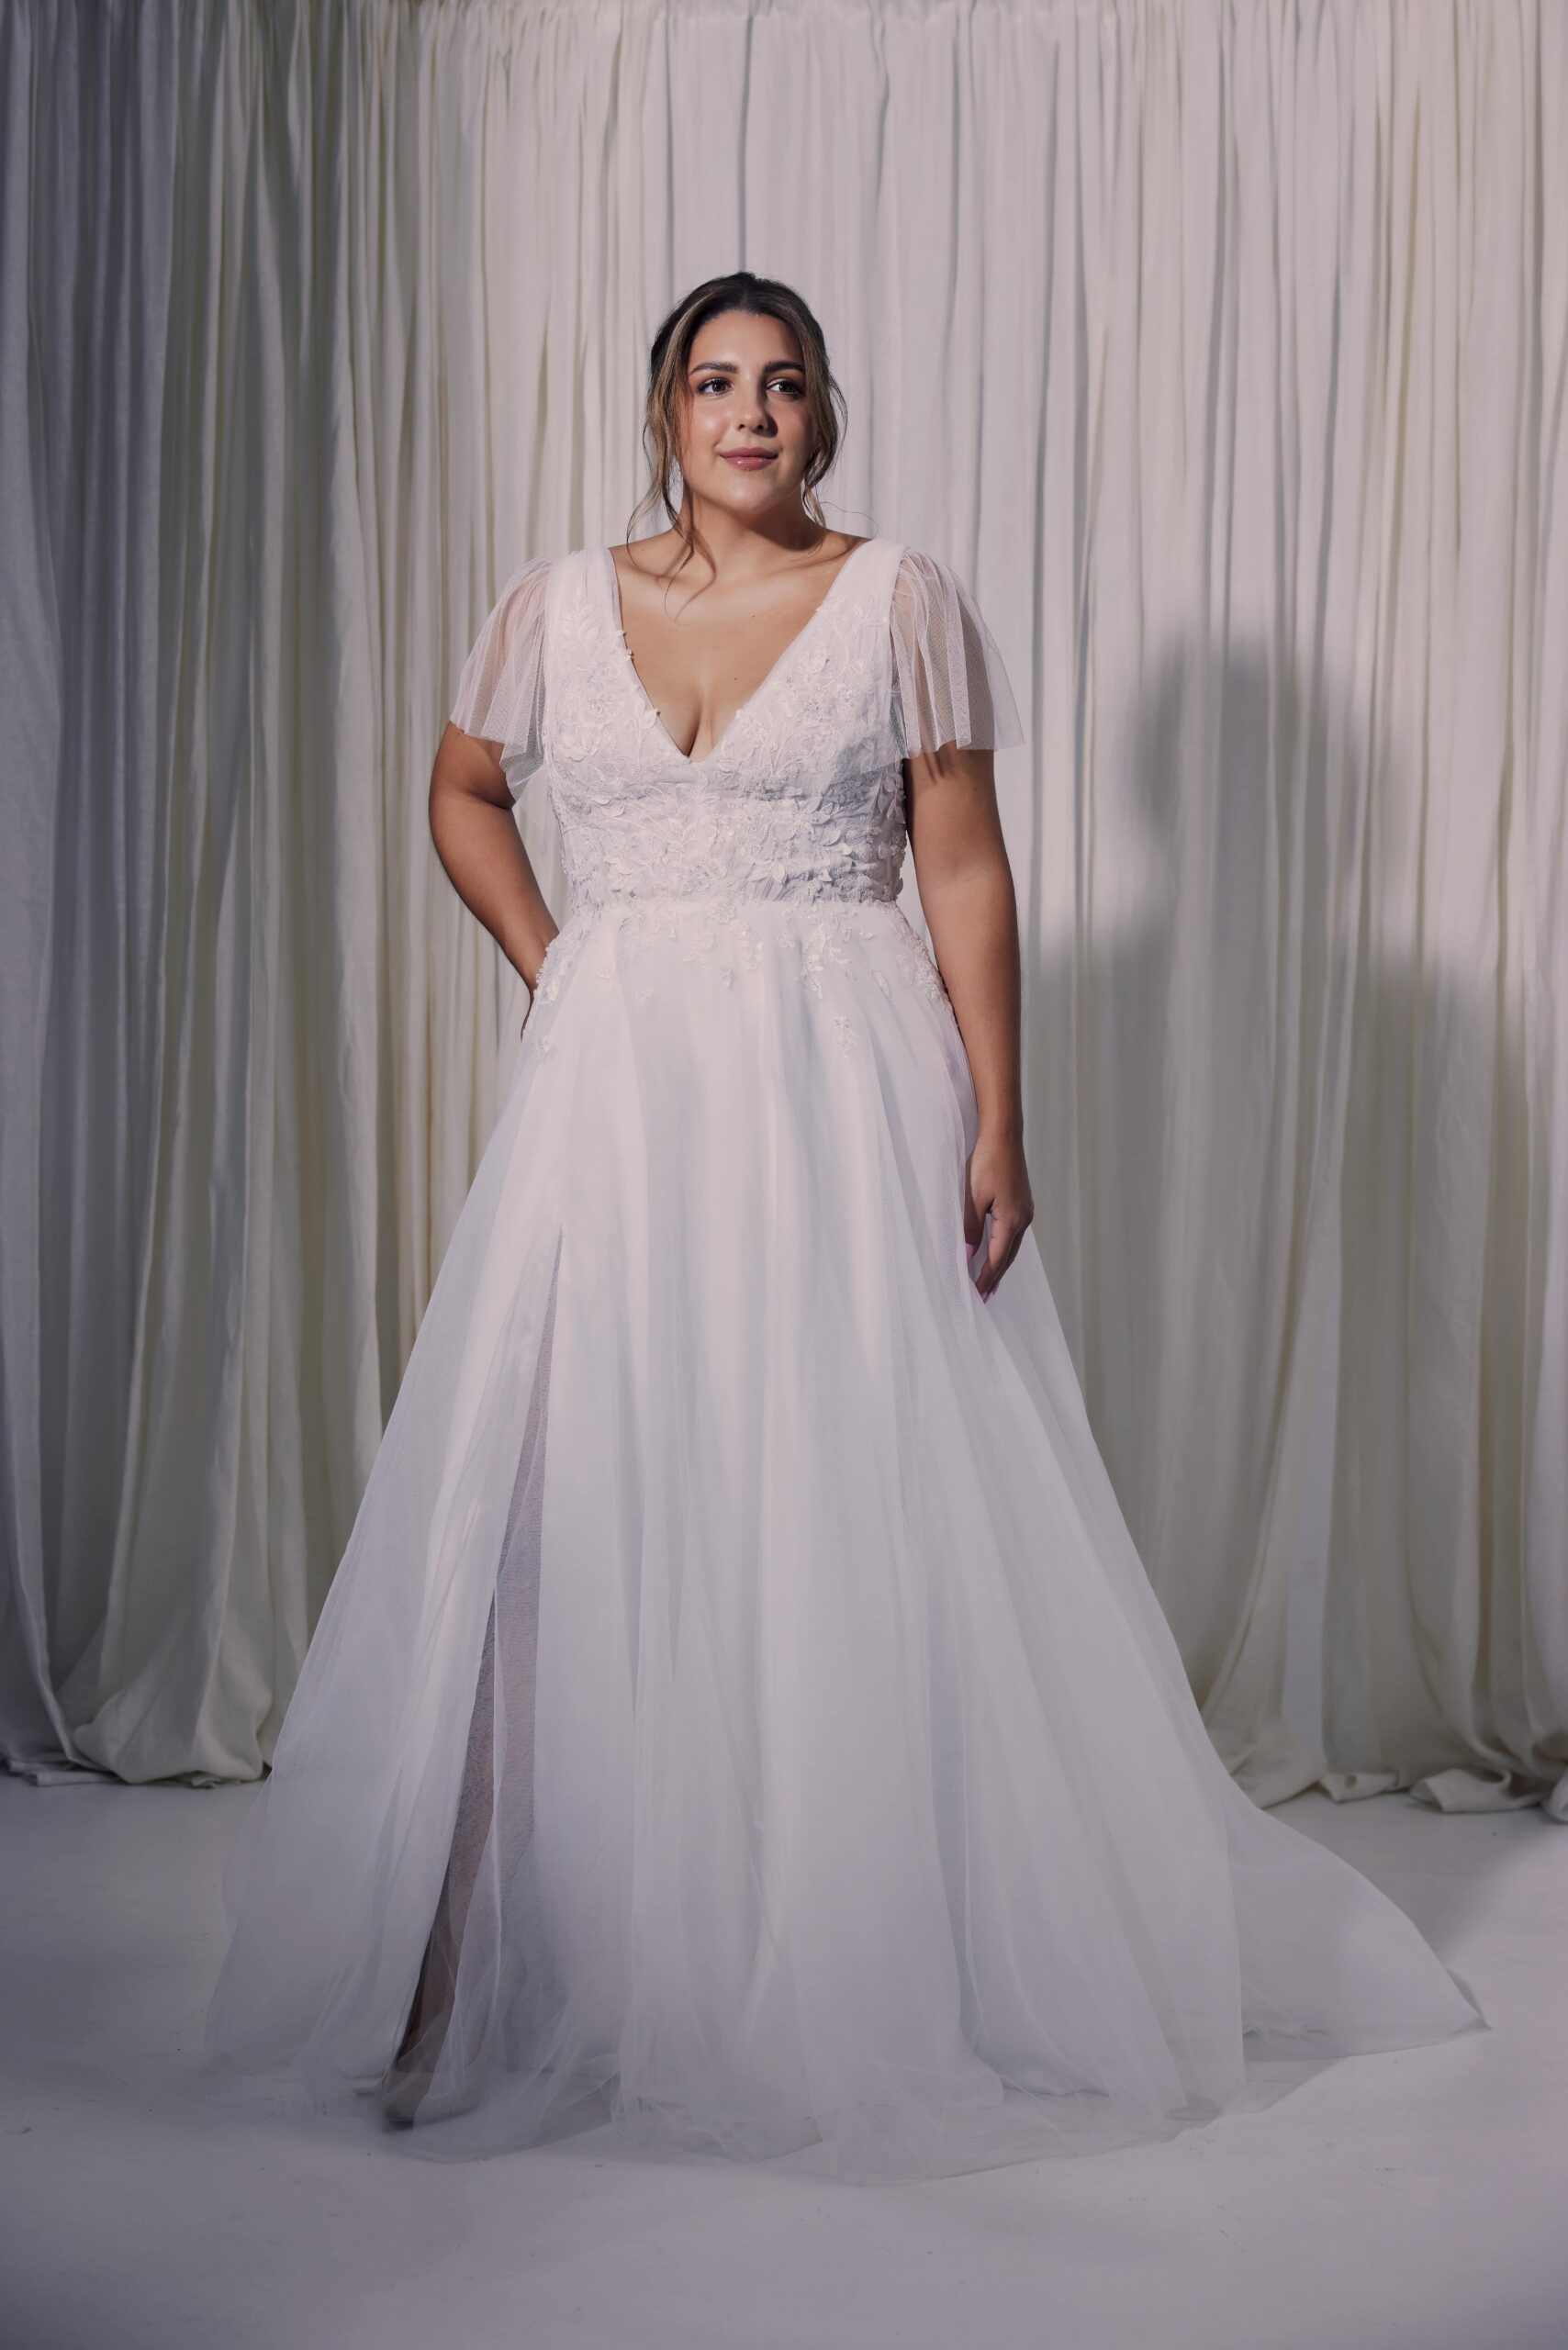 The Ellie gown - a v-neck gown with soft rouched bodice, flutter sleeves and 3D lace applique trailing into a soft flowing skirt.